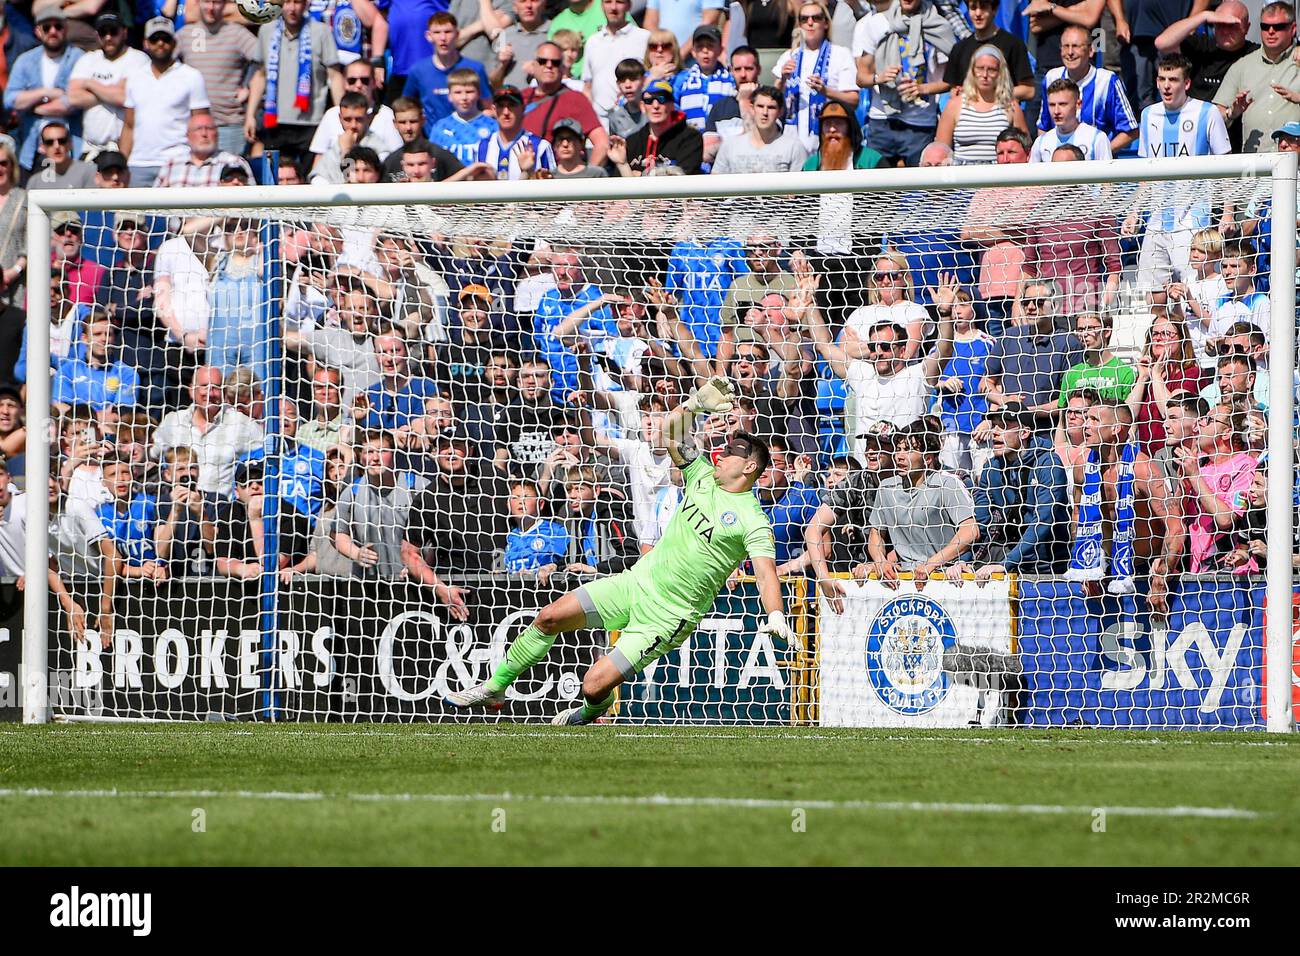 Matthew Lund #8 of Salford City misses his penalty in the penalty shoot out during the Sky Bet League 2 Play-Off match Stockport County vs Salford City at Edgeley Park Stadium, Stockport, United Kingdom, 20th May 2023  (Photo by Ben Roberts/News Images) Stock Photo